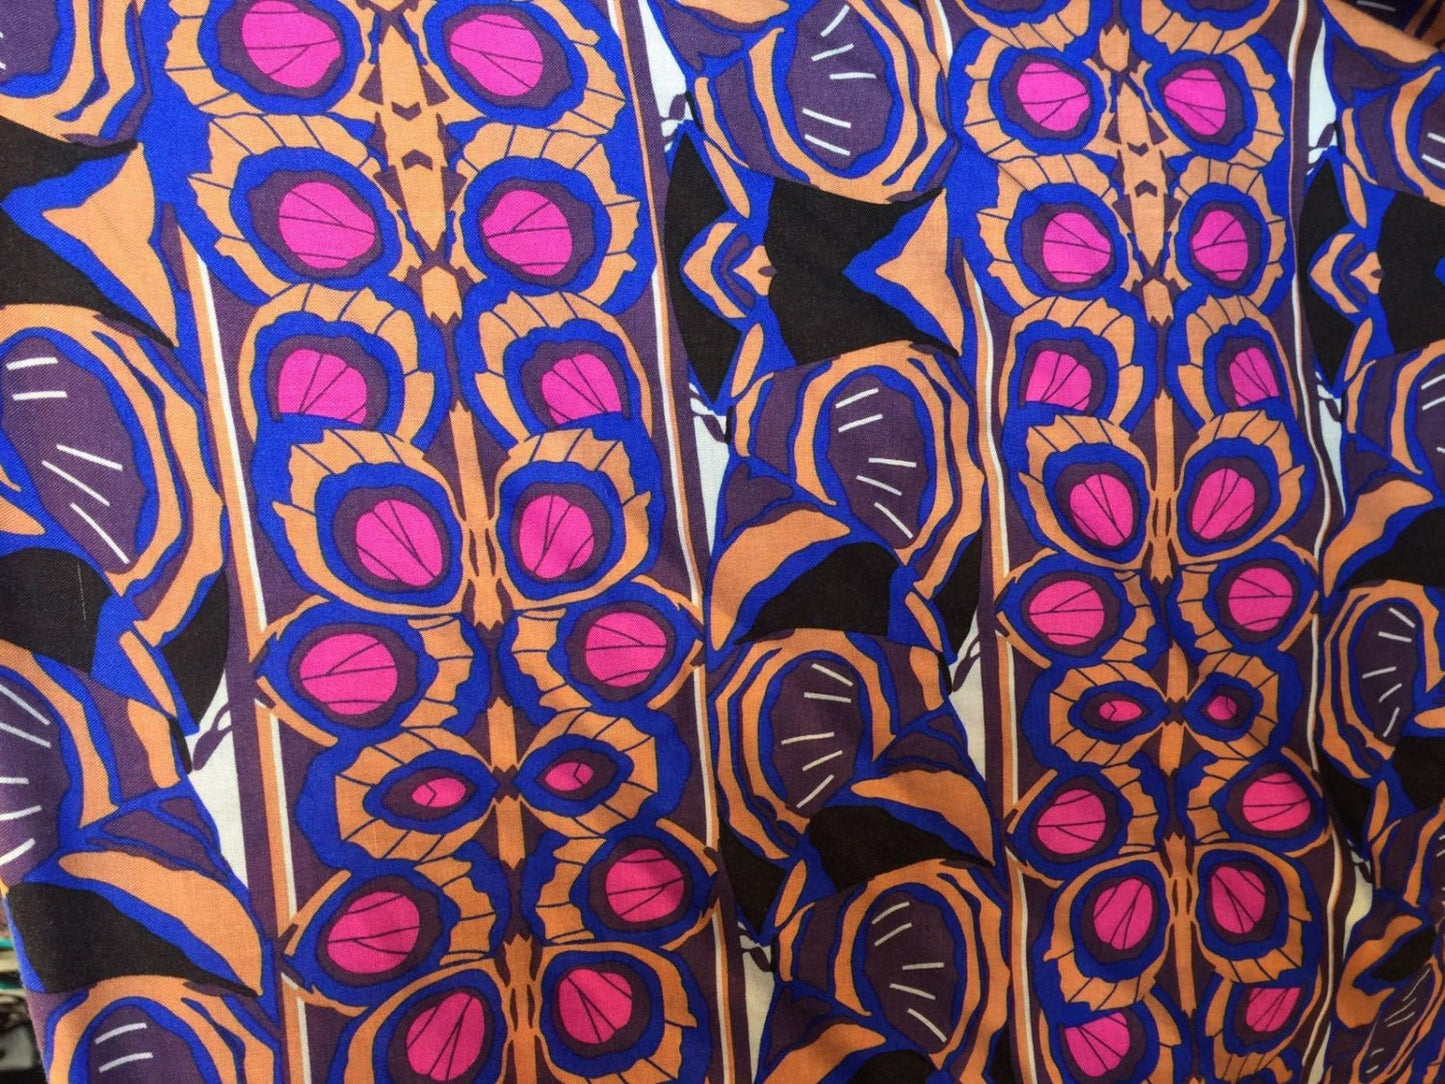 100% Rayon. Tropical Inspired Print with Hues of Fuchsia, Blue, Brown and Black Hues. 58-60 Inches Wide Sold by the Yard